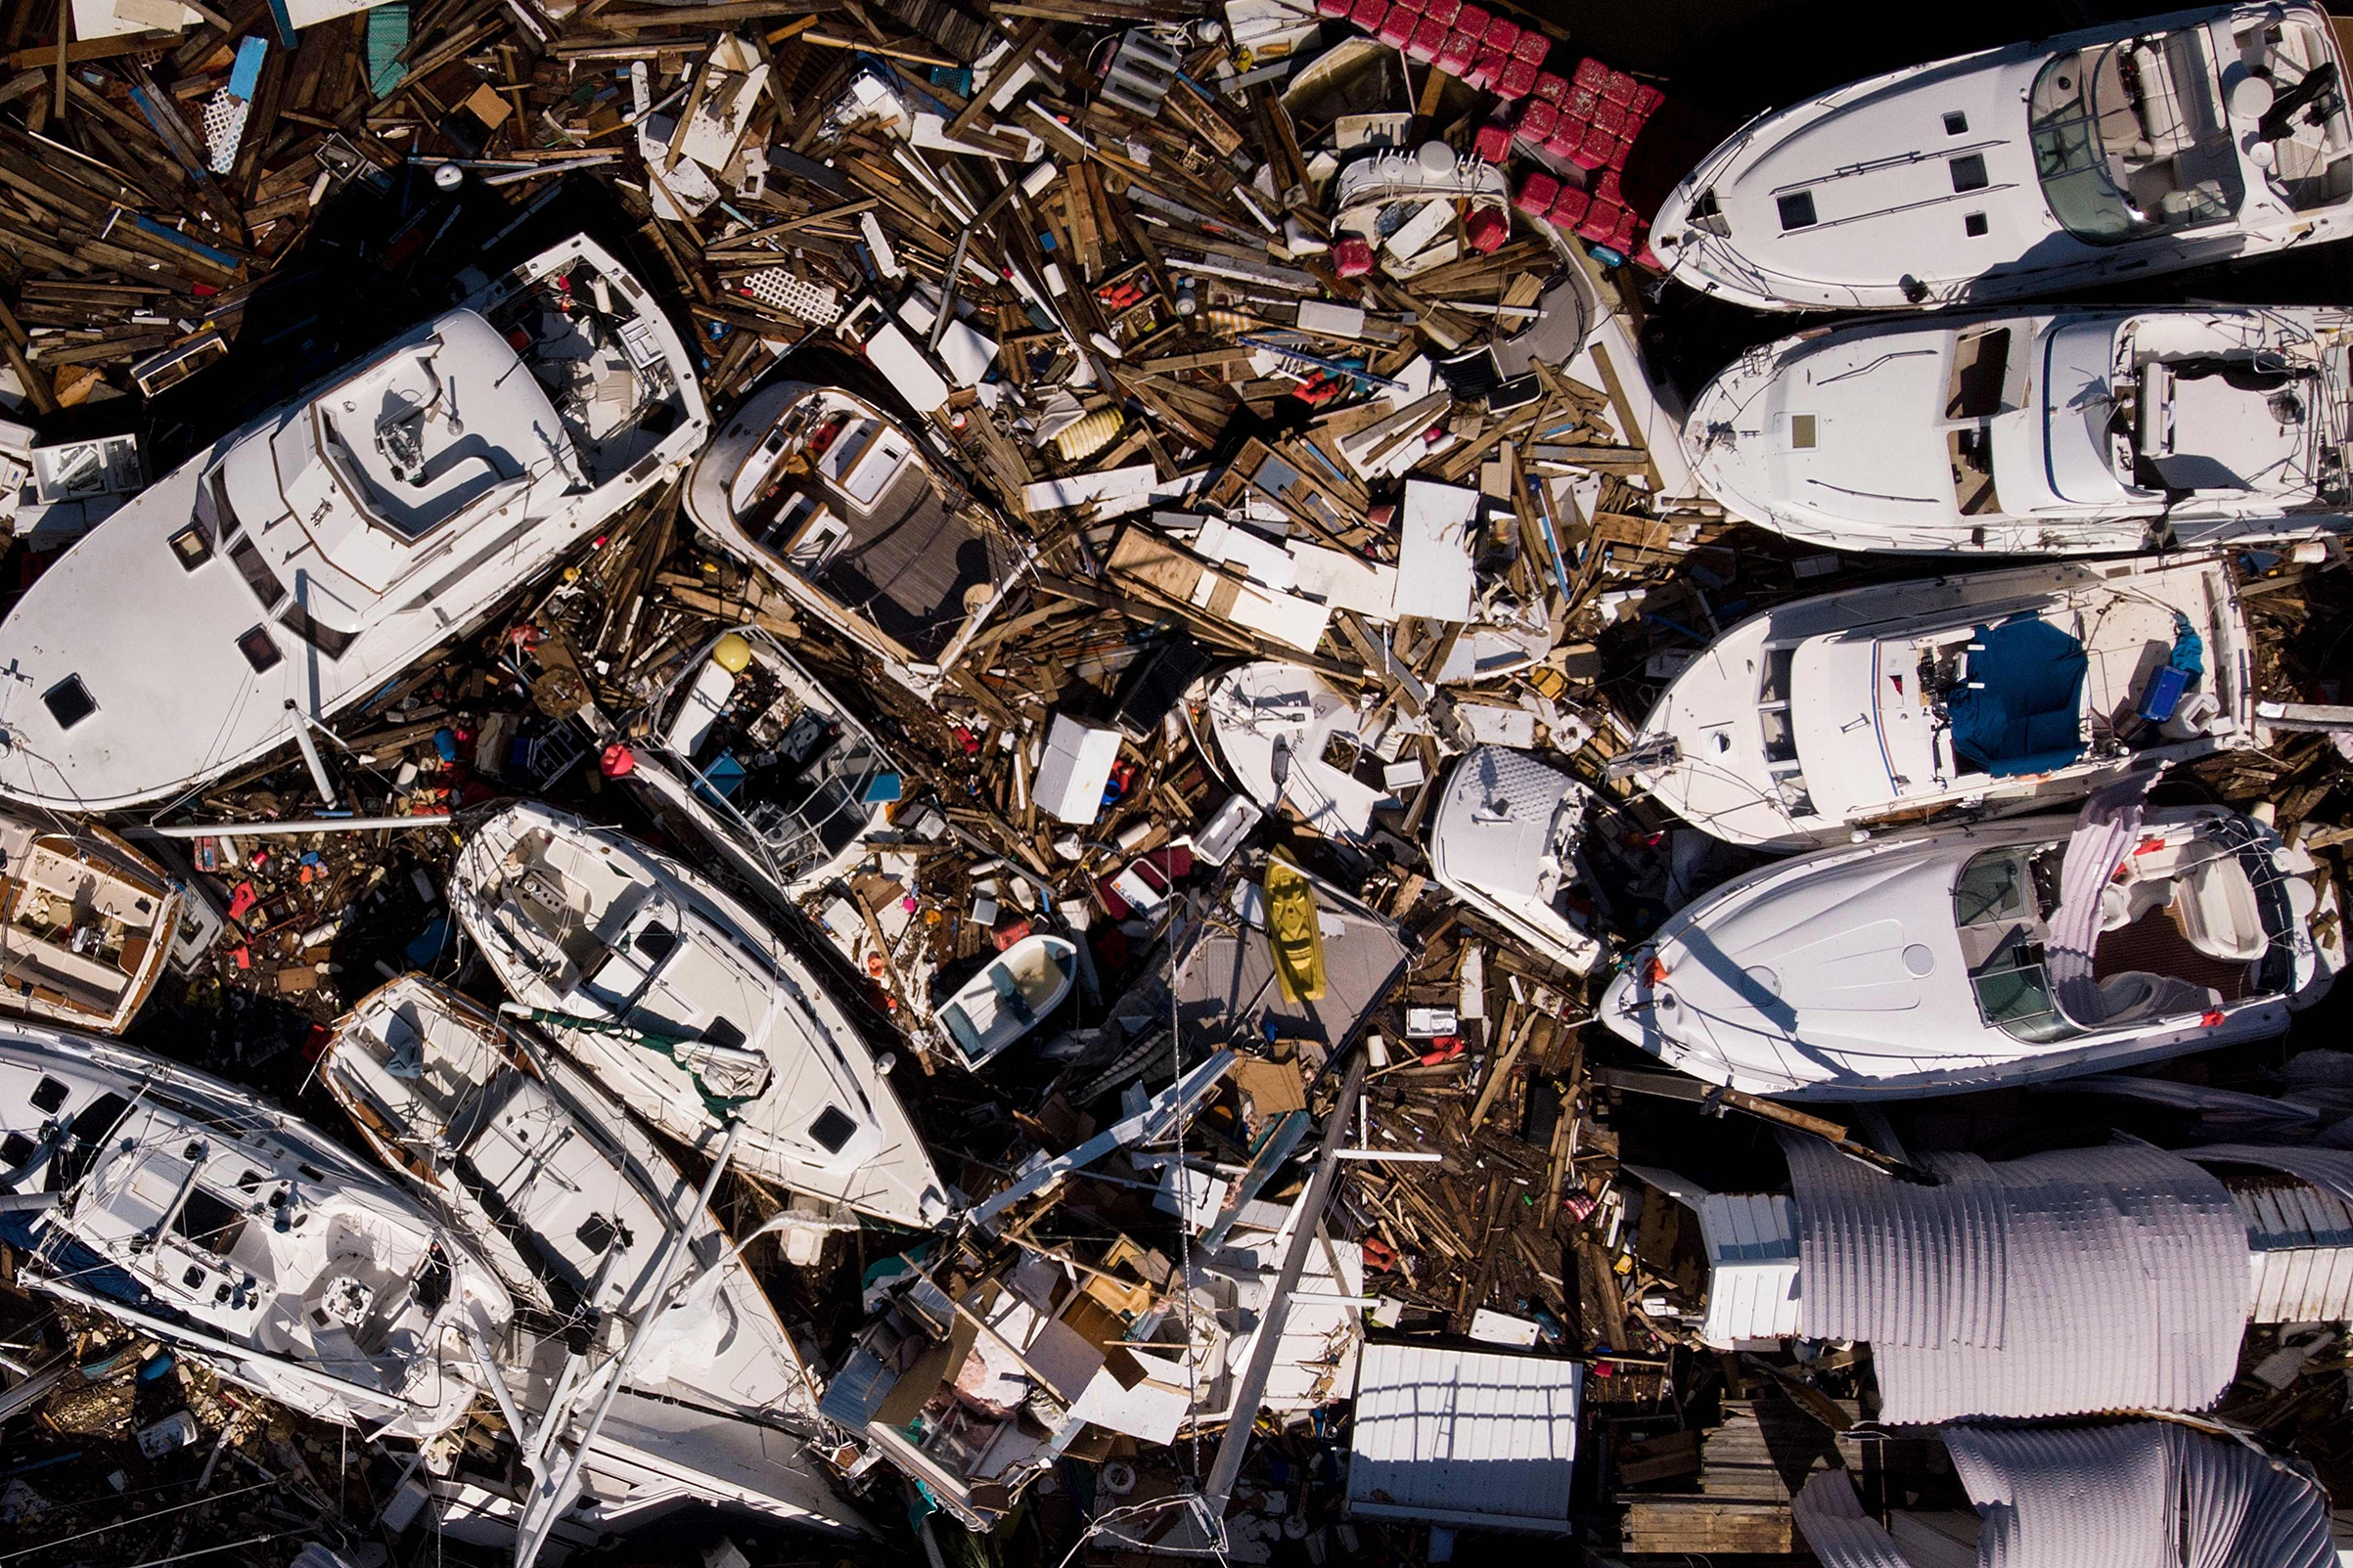 Storm damaged boats are seen in the aftermath of Hurricane Michael on Oct. 11, 2018 in Panama City, Fla. (Brendan Smialowski—AFP/Getty Images)